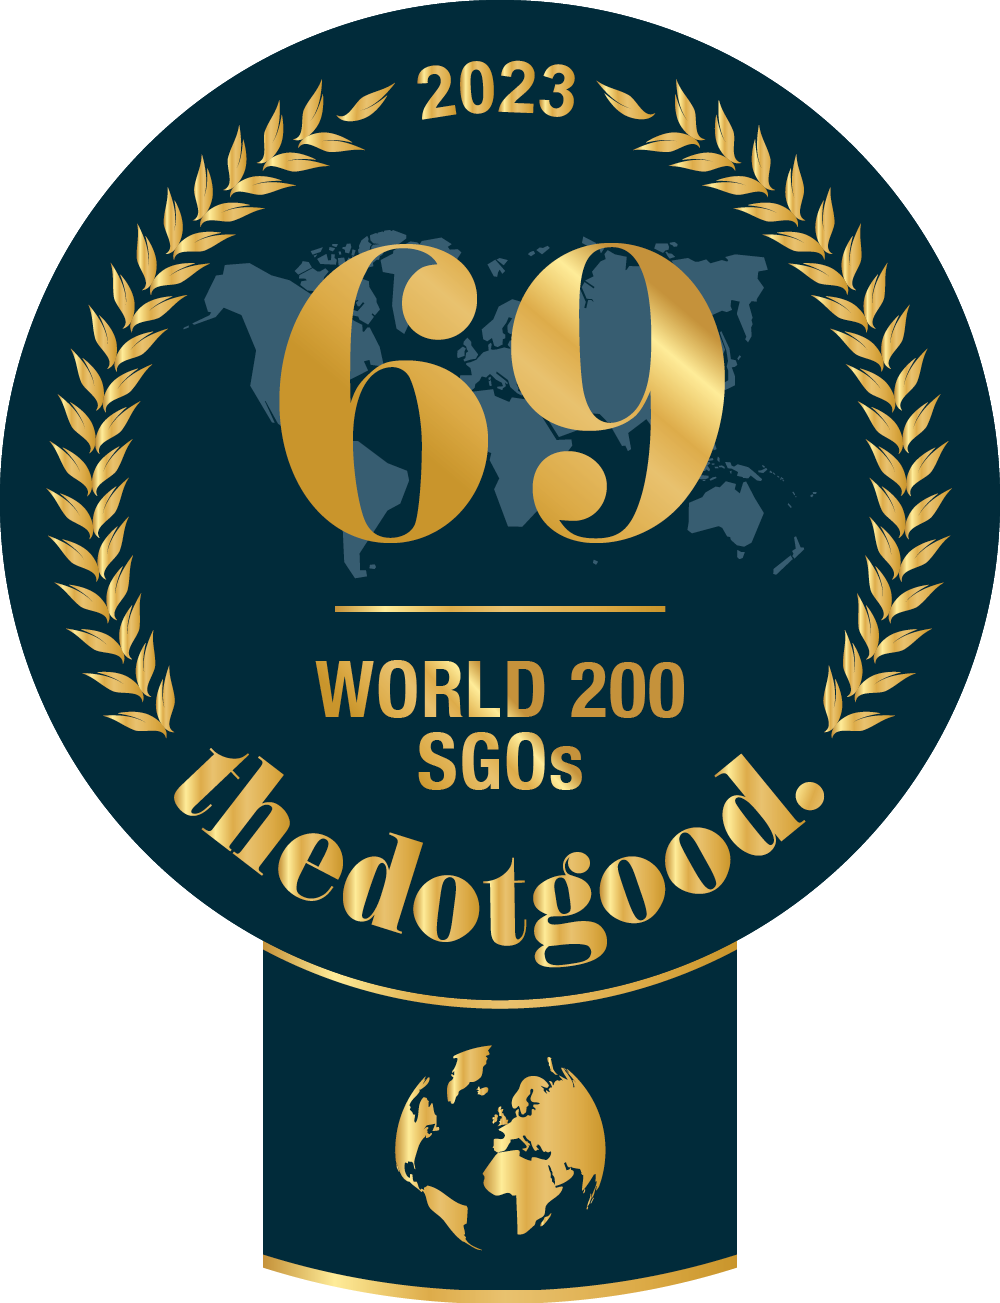 INSTITUTO DA CRIANCA is world ranked on thedotgood.